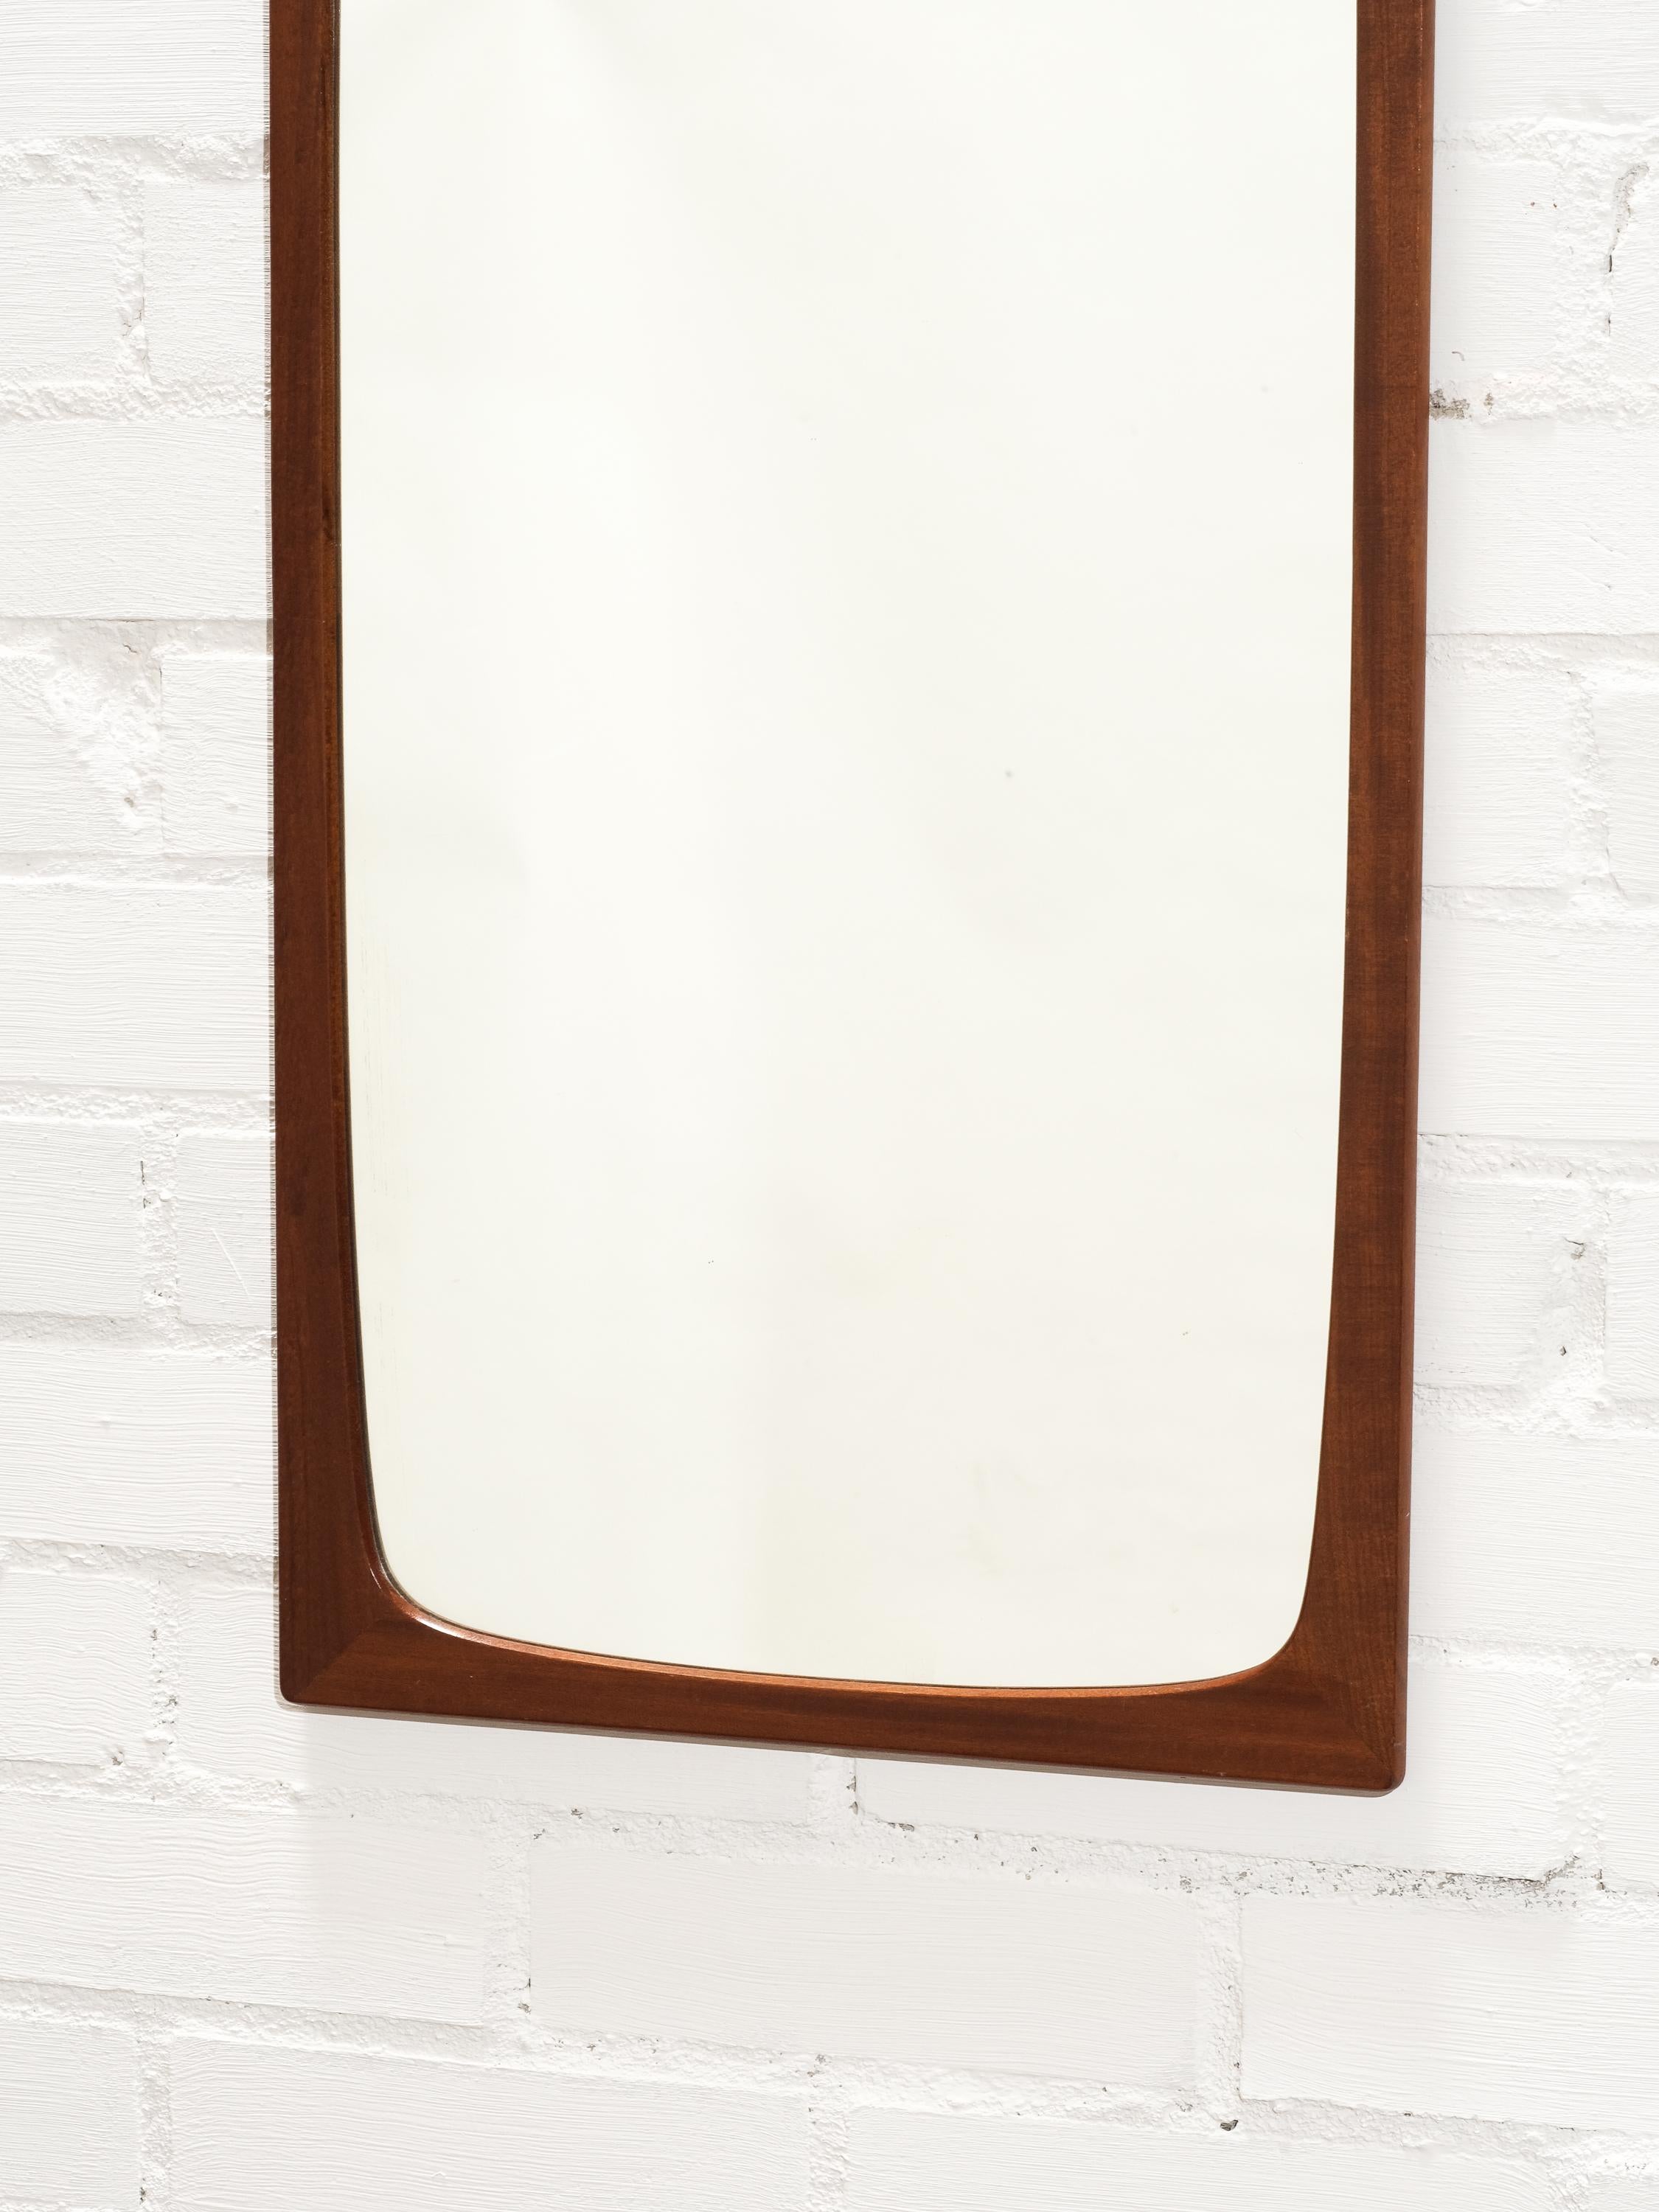 A solid teak wall mirror designed and produced Glas & Trä, Hovmantorp Sweden, 1950s-1960s.